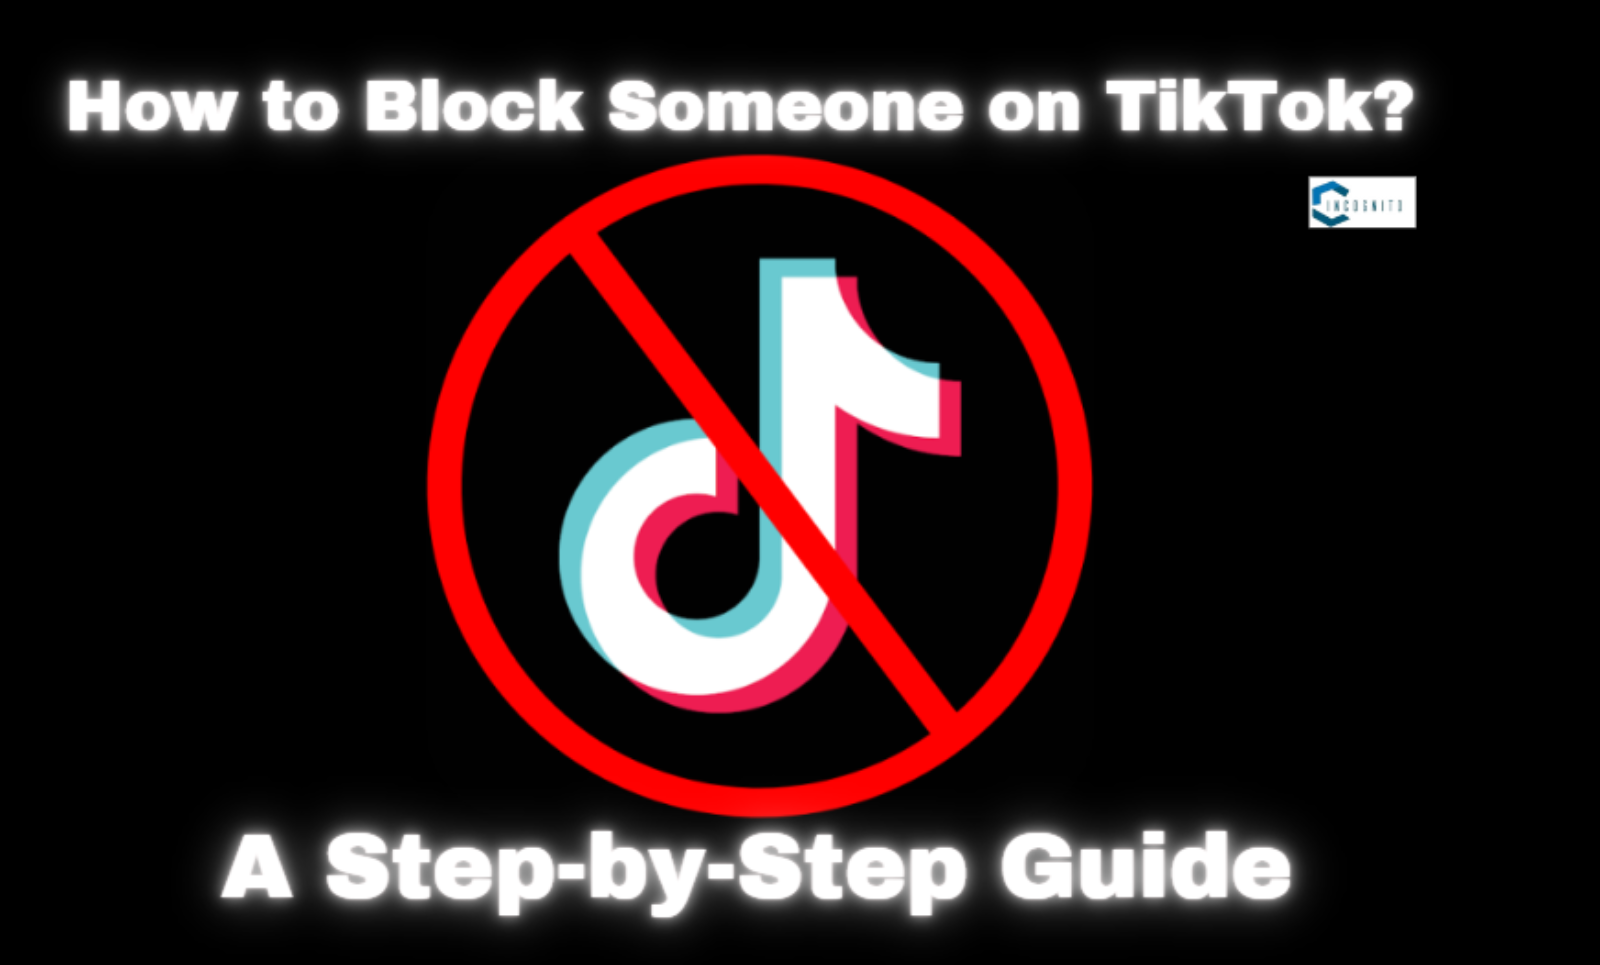 How to Block Someone on TikTok? A Step-by-Step Guide